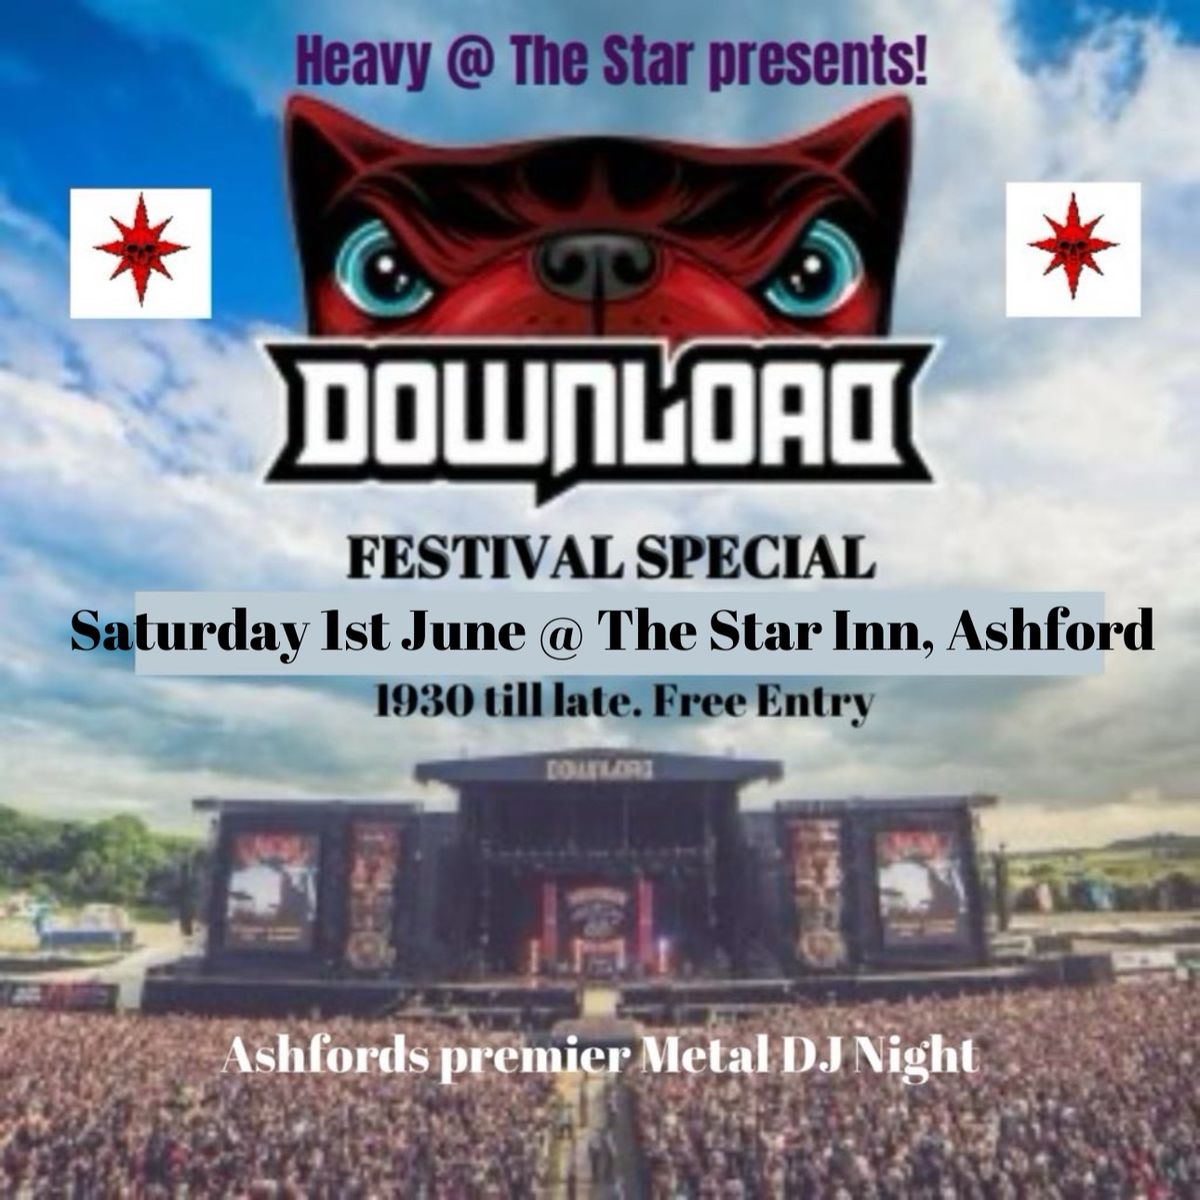 Heavy at The Star presents a Download Festival special DJ night